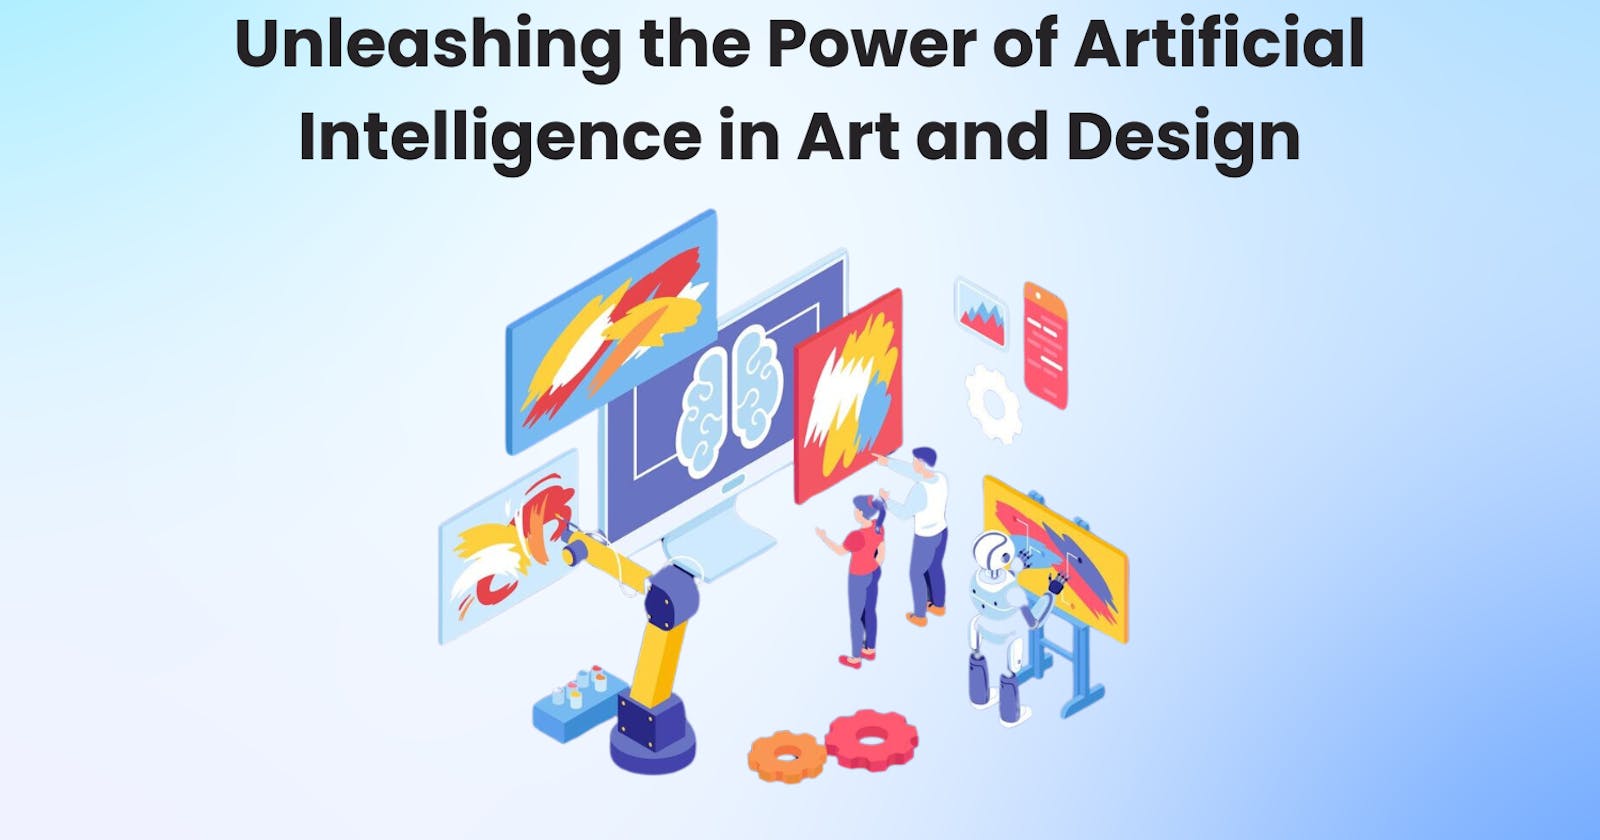 Unleashing the Power of Artificial Intelligence in Art and Design